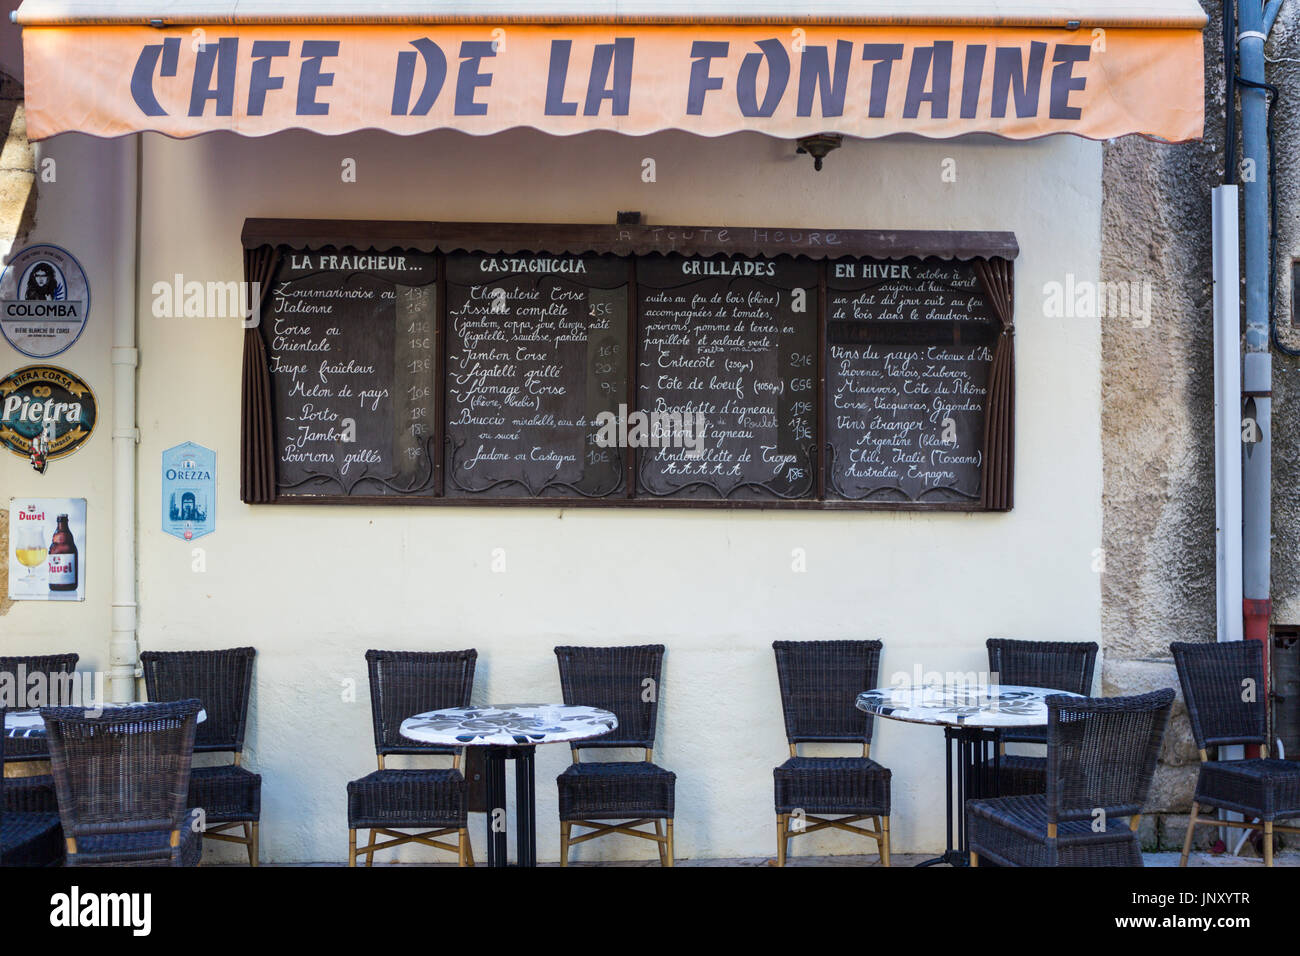 Lourmarin, Luberon, Provence, France - October 9, 2015: Tables, chairs, menu boards of the Cafe de la Fontaine, Lourmarin, Luberon, Provence, France. Stock Photo